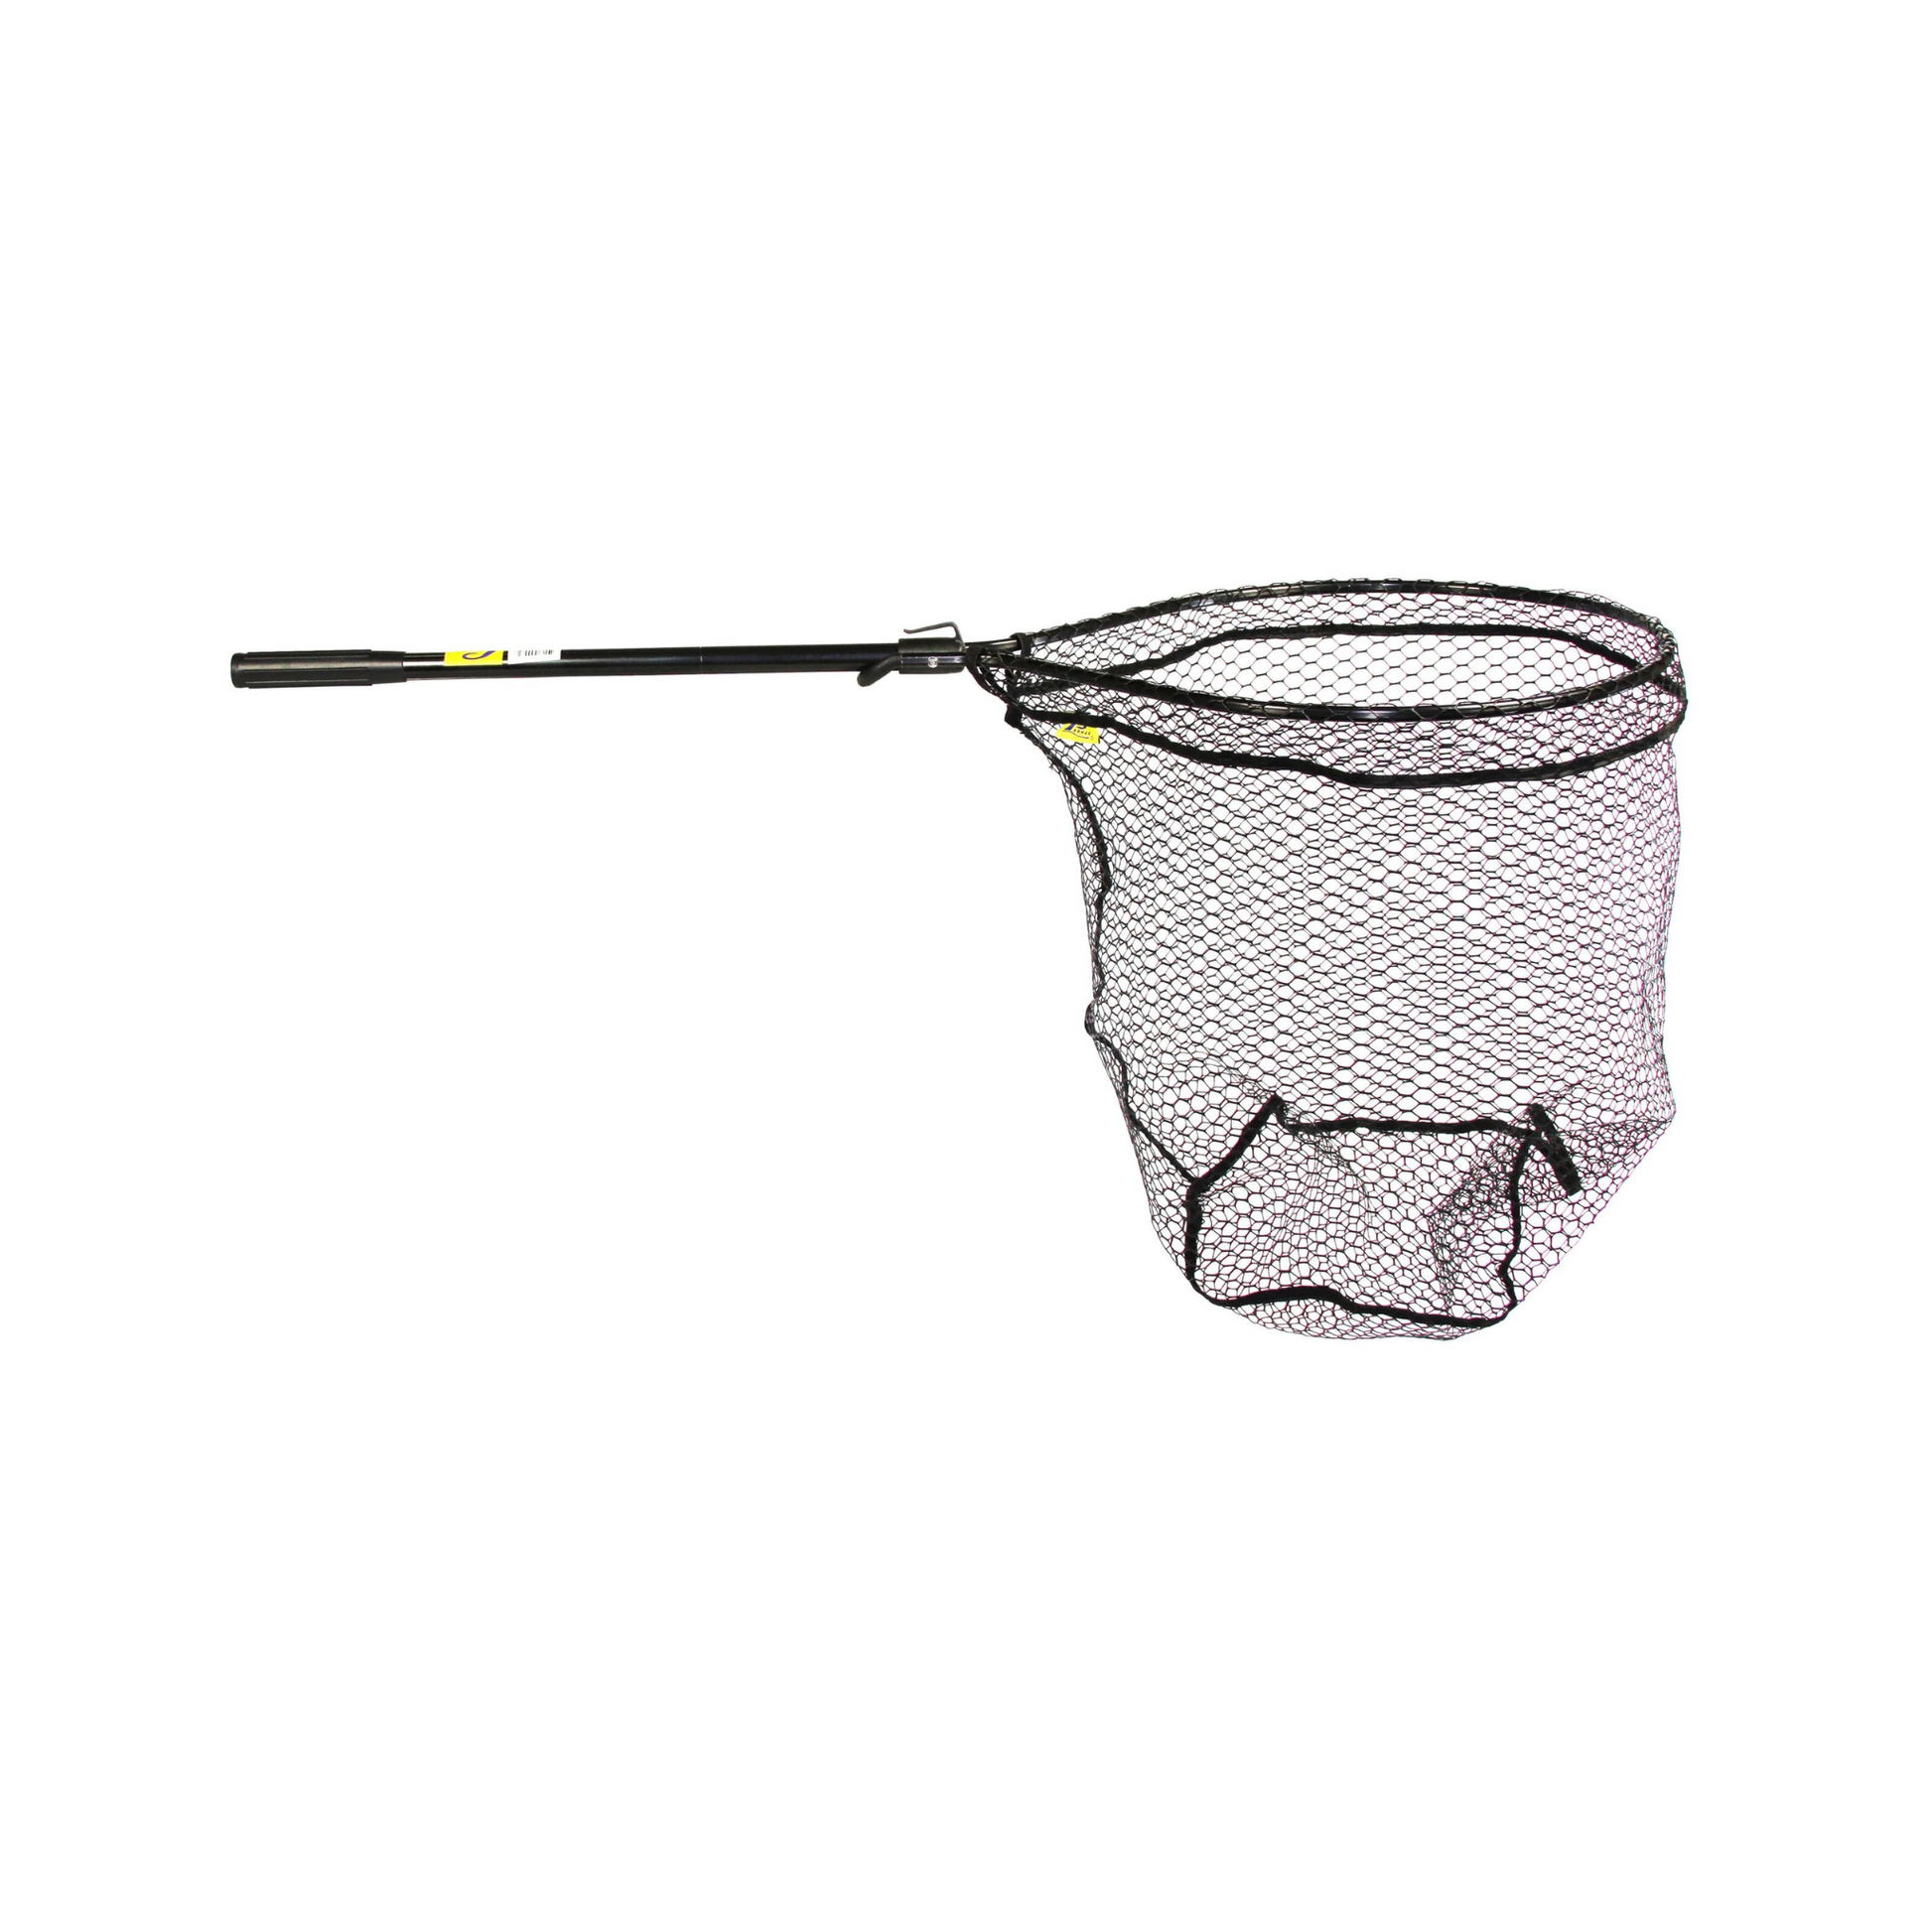 Promar Fishing Nets in Fishing Accessories 